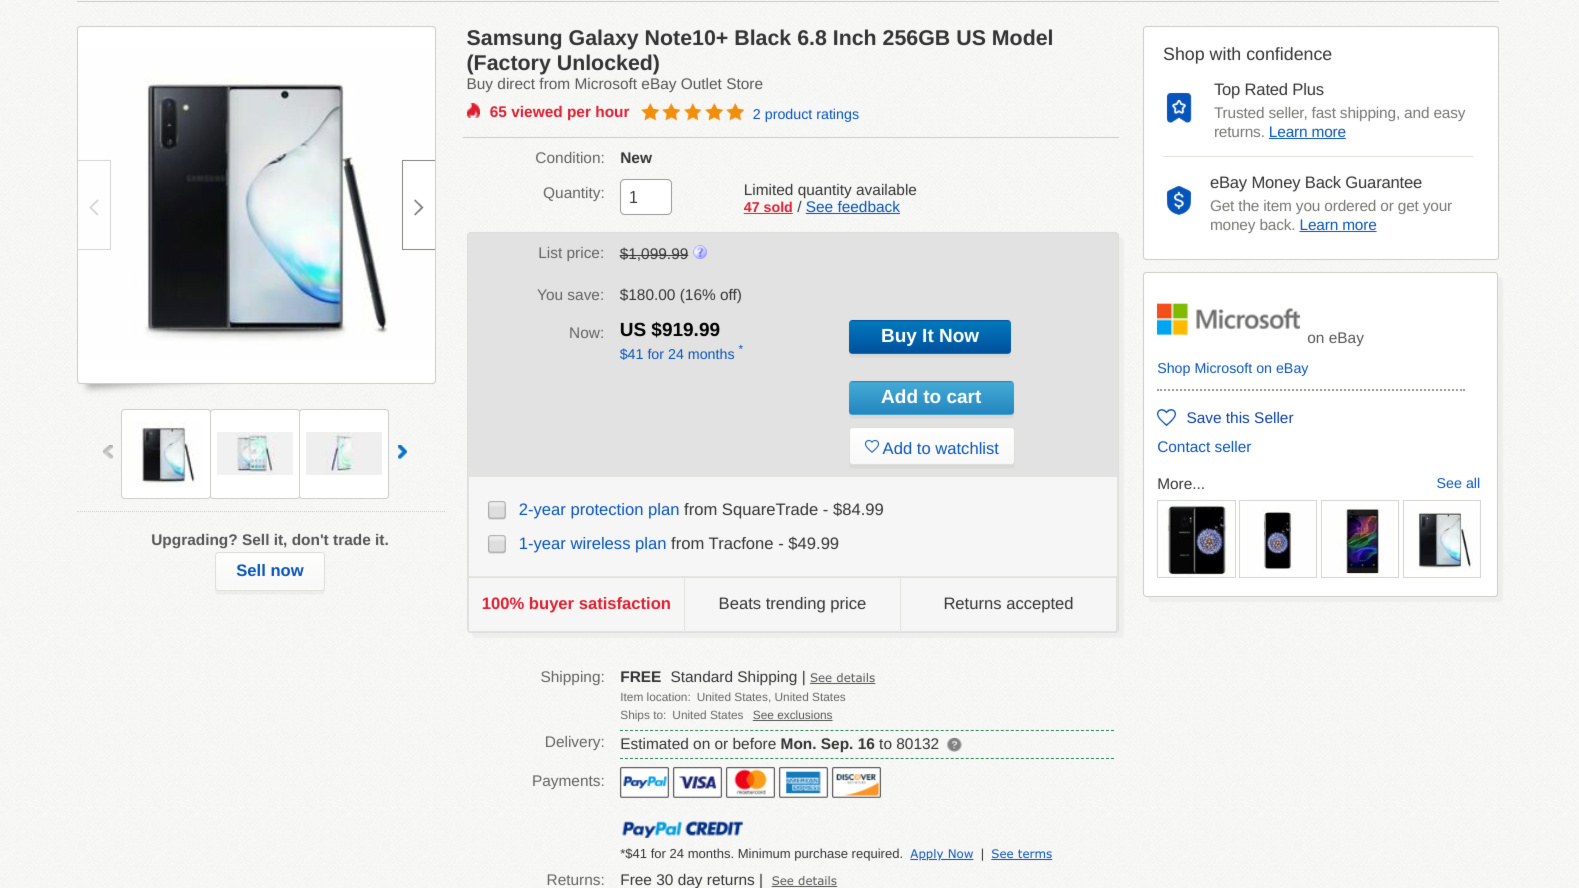 Deal on the Samsung Galaxy Note 10 Plus through Microsofts eBay store